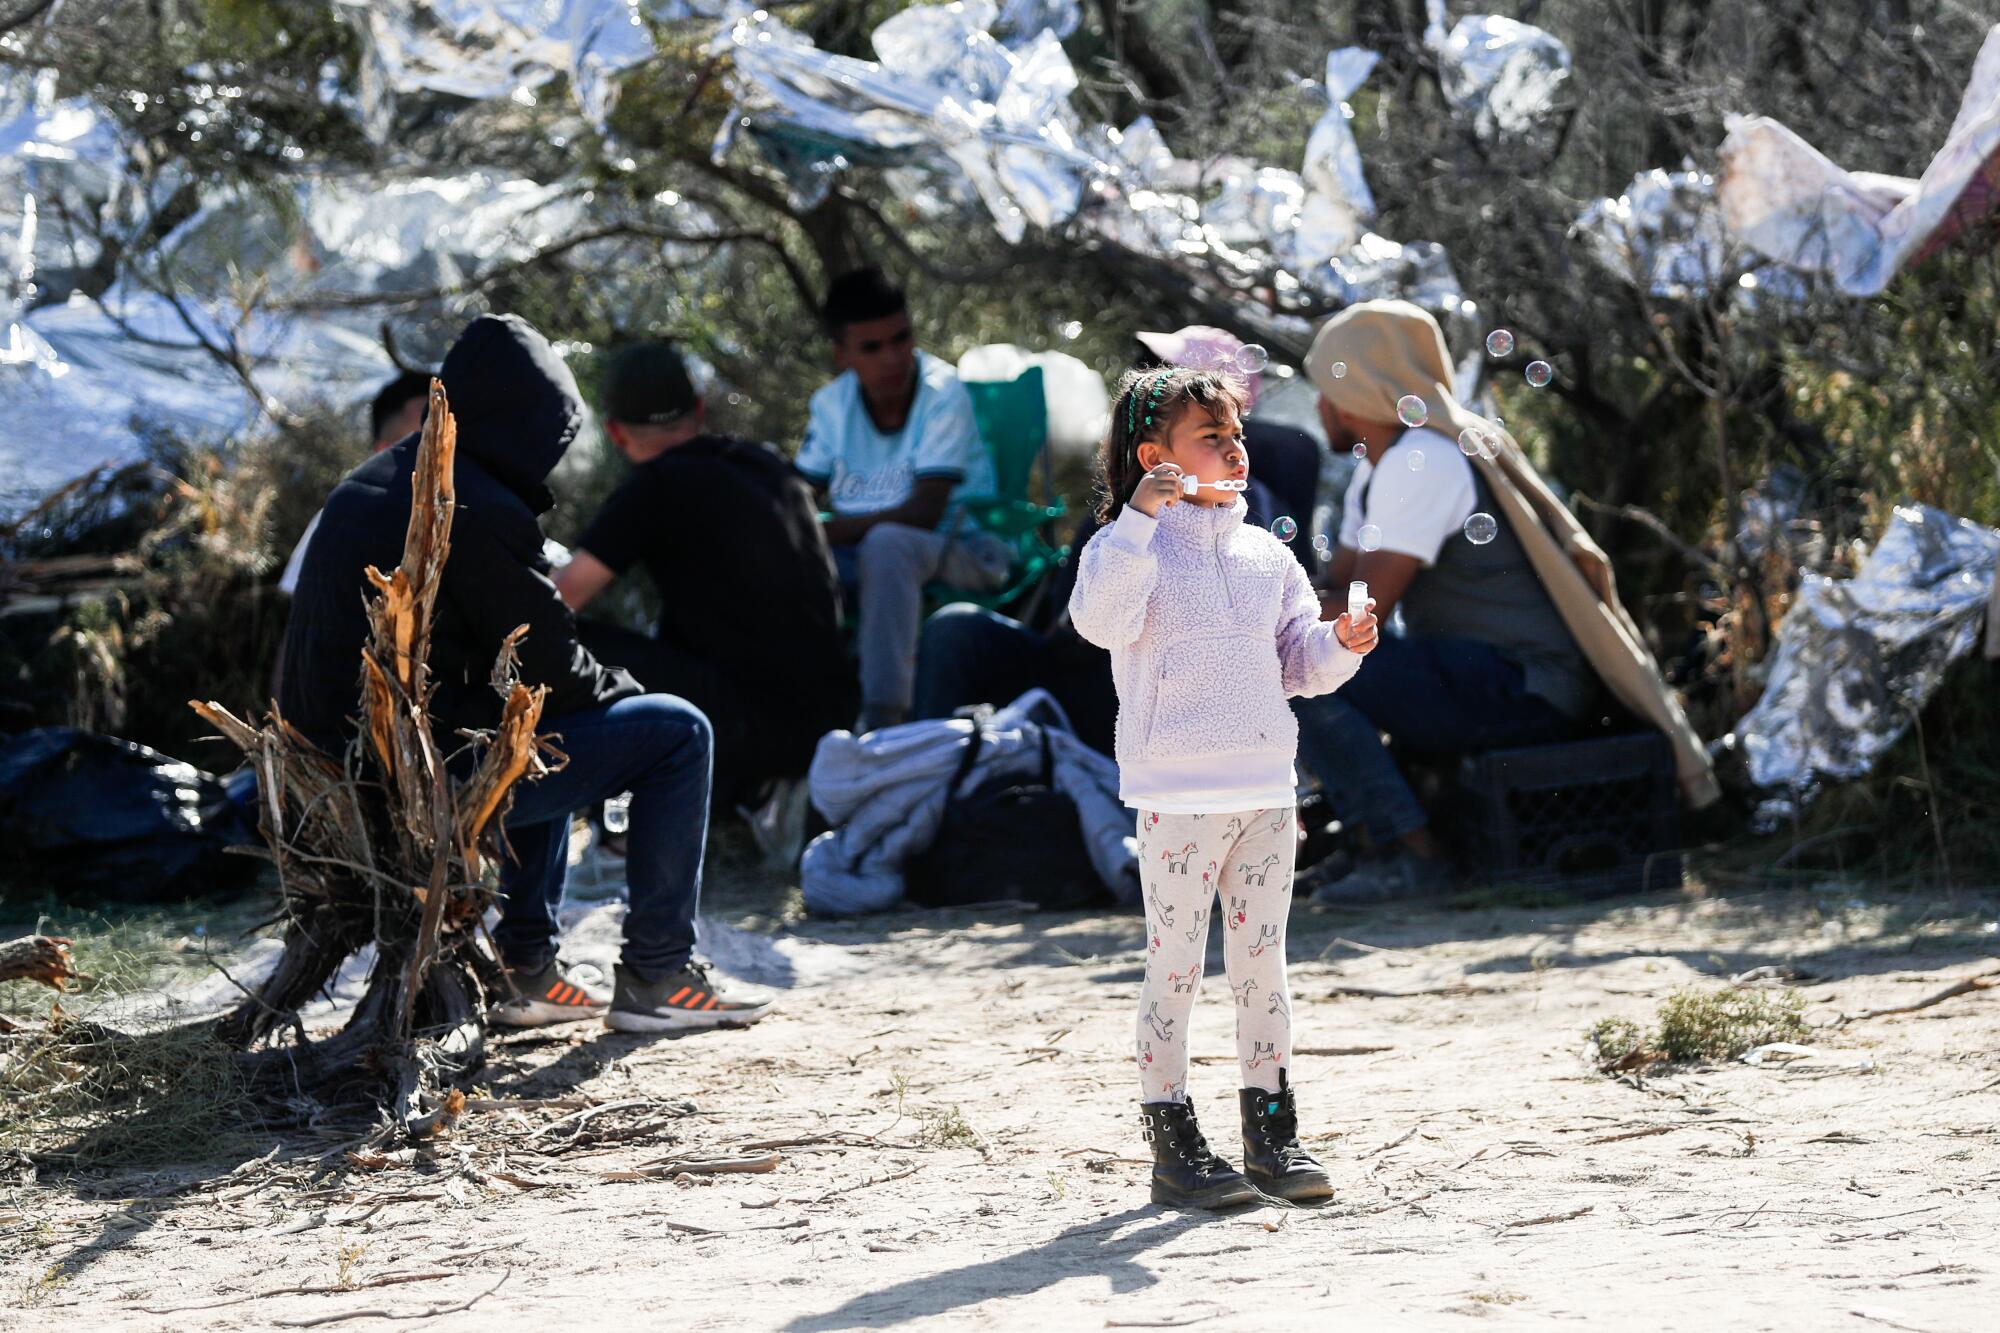 Luciana Eyleen, 7, from Colombia, blows bubbles near other migrants in a makeshift campsite